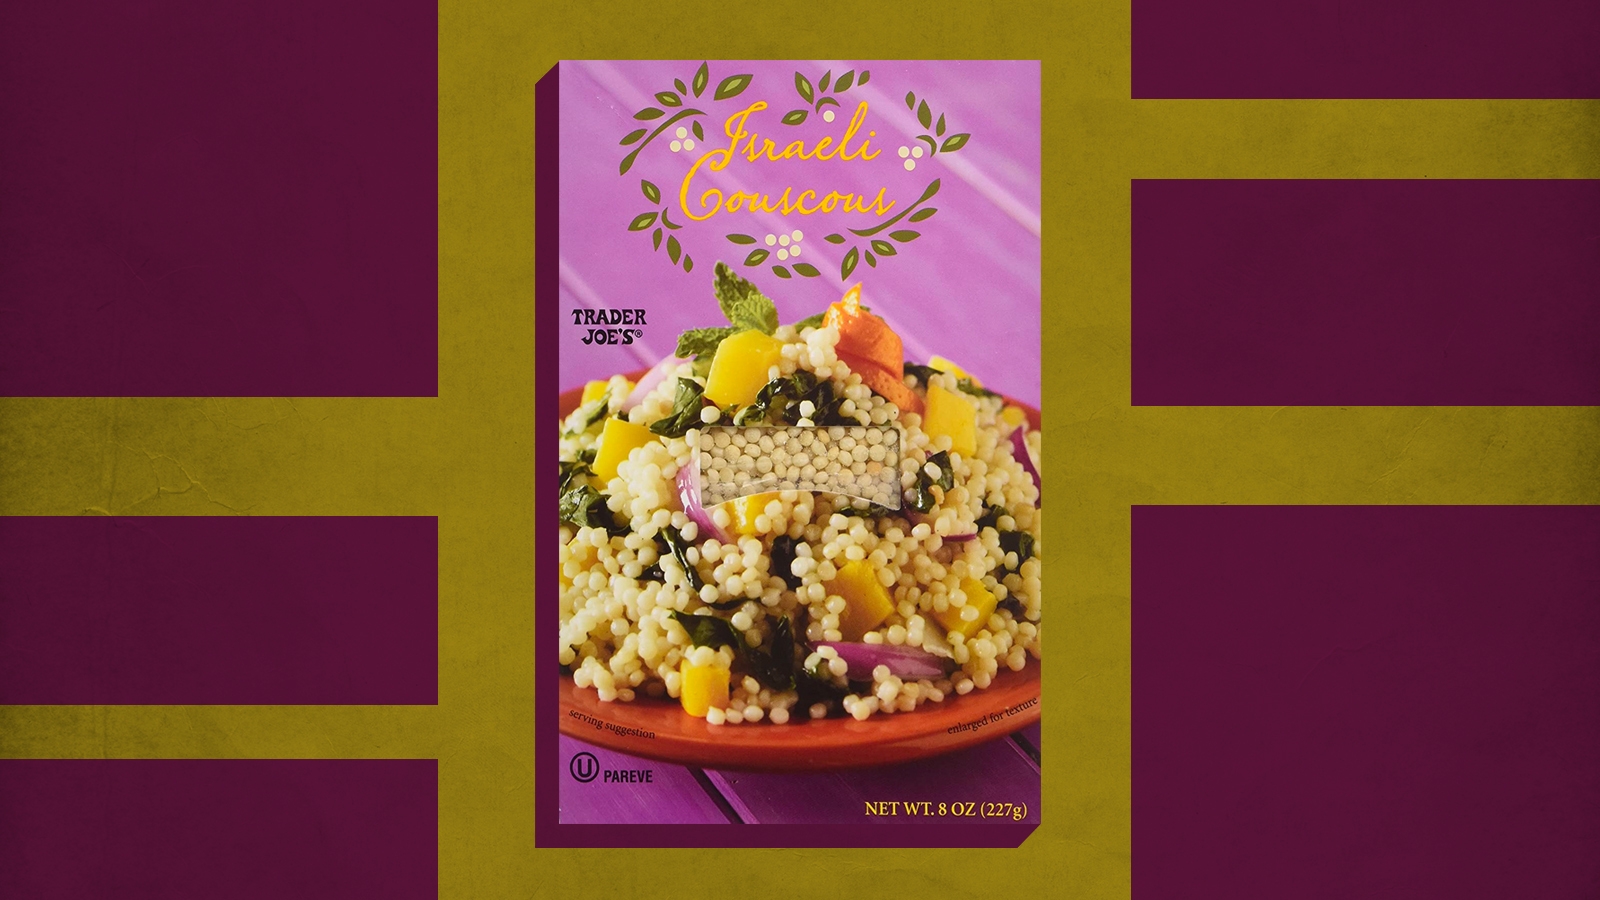 The old packaging for Trader Joe’s pearl couscous called the product “Israeli.” The new packaging will call it “pearl couscous.” (Image from Amazon; collage by Grace Yagel)